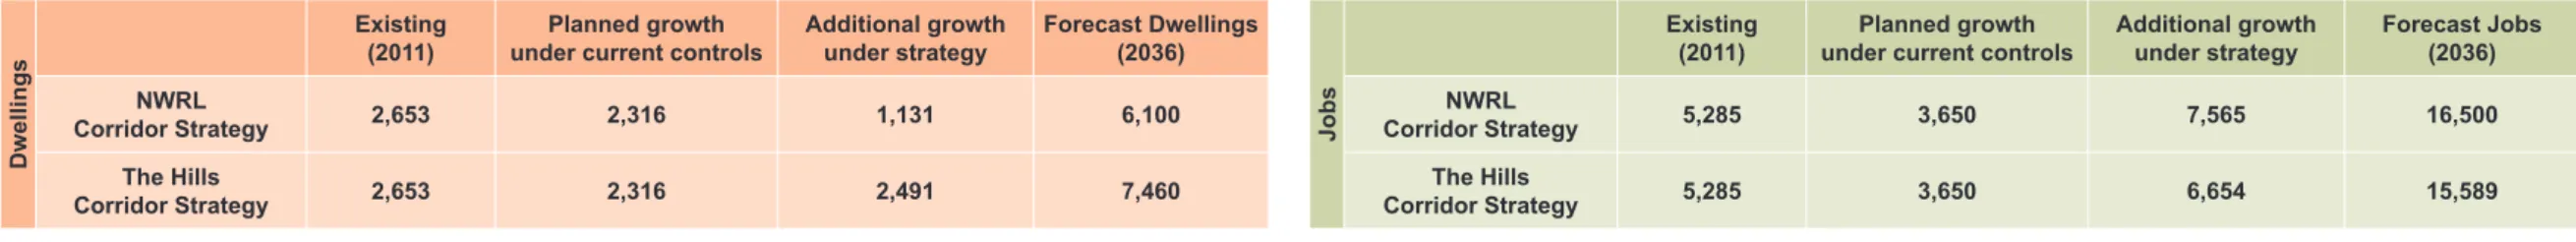 Table 7.1: Castle Hill Projected Dwellings